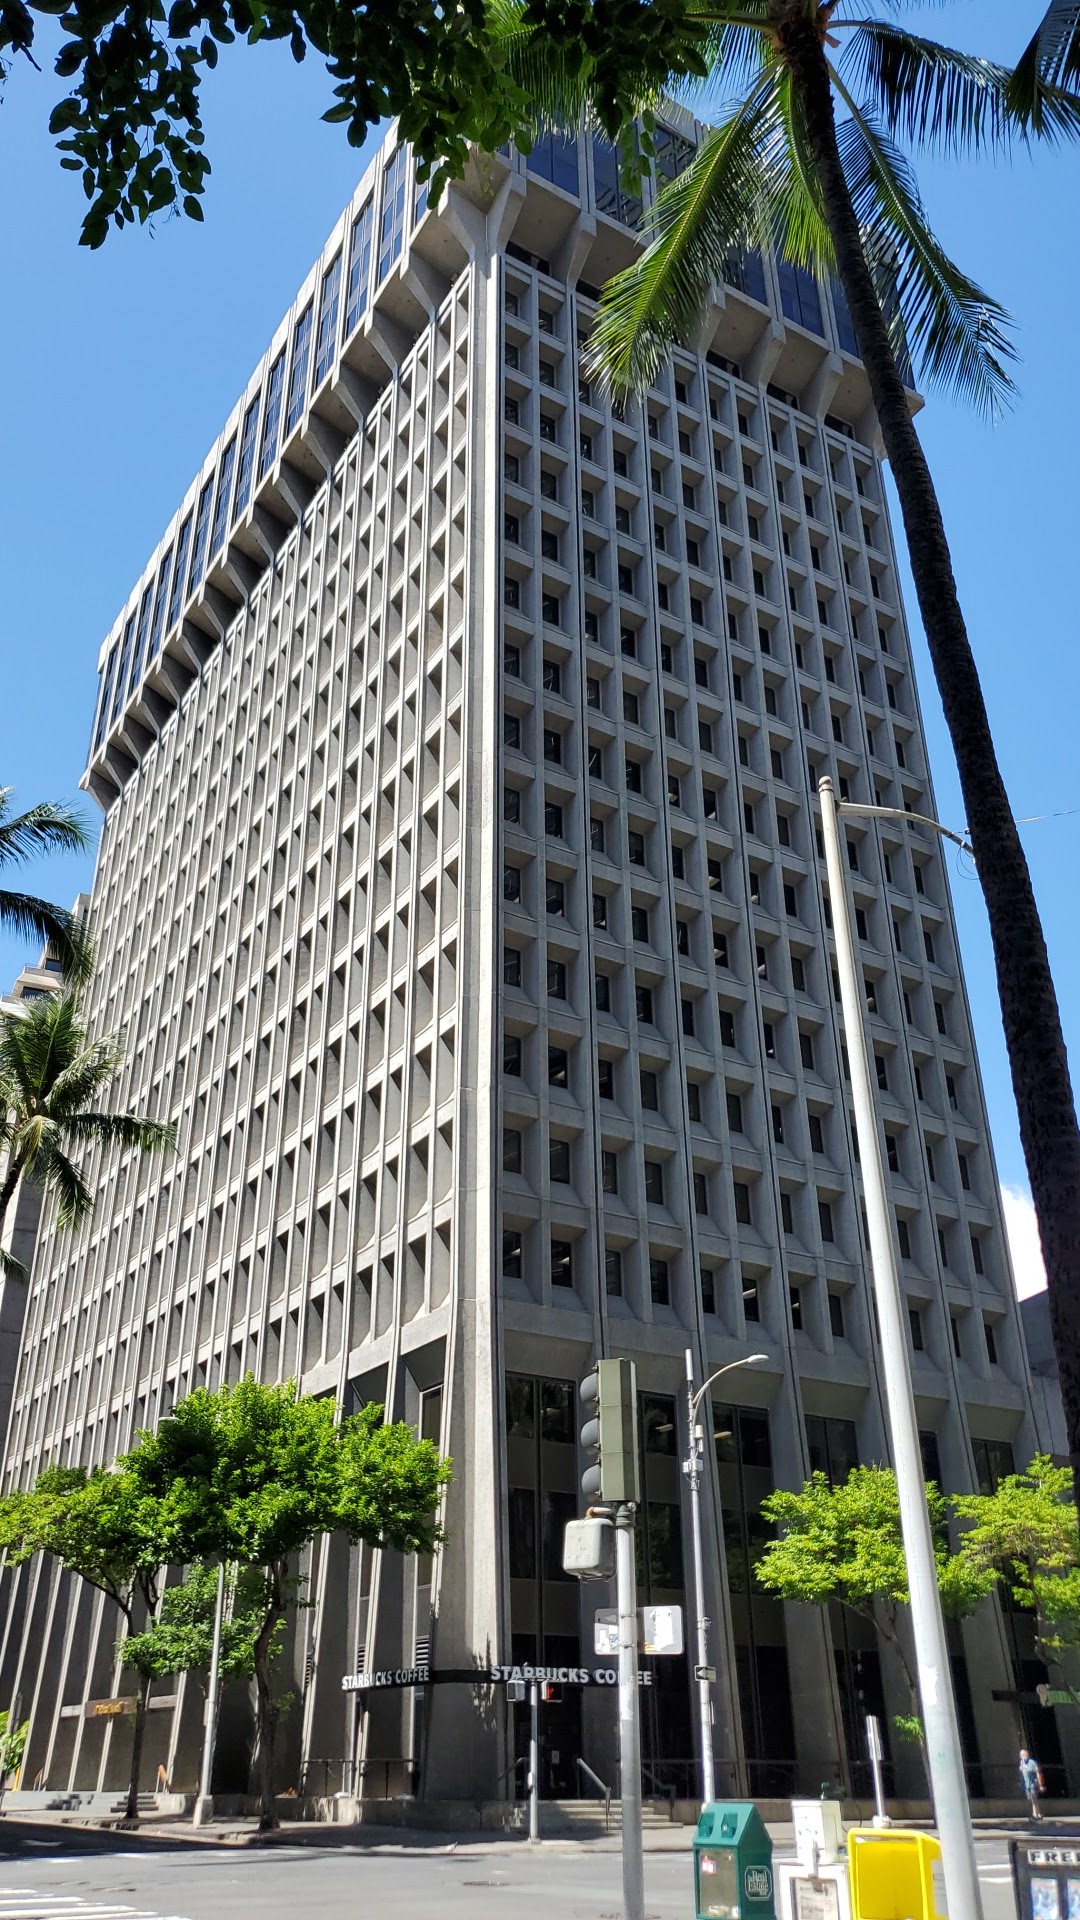 Financial Plaza of the Pacific